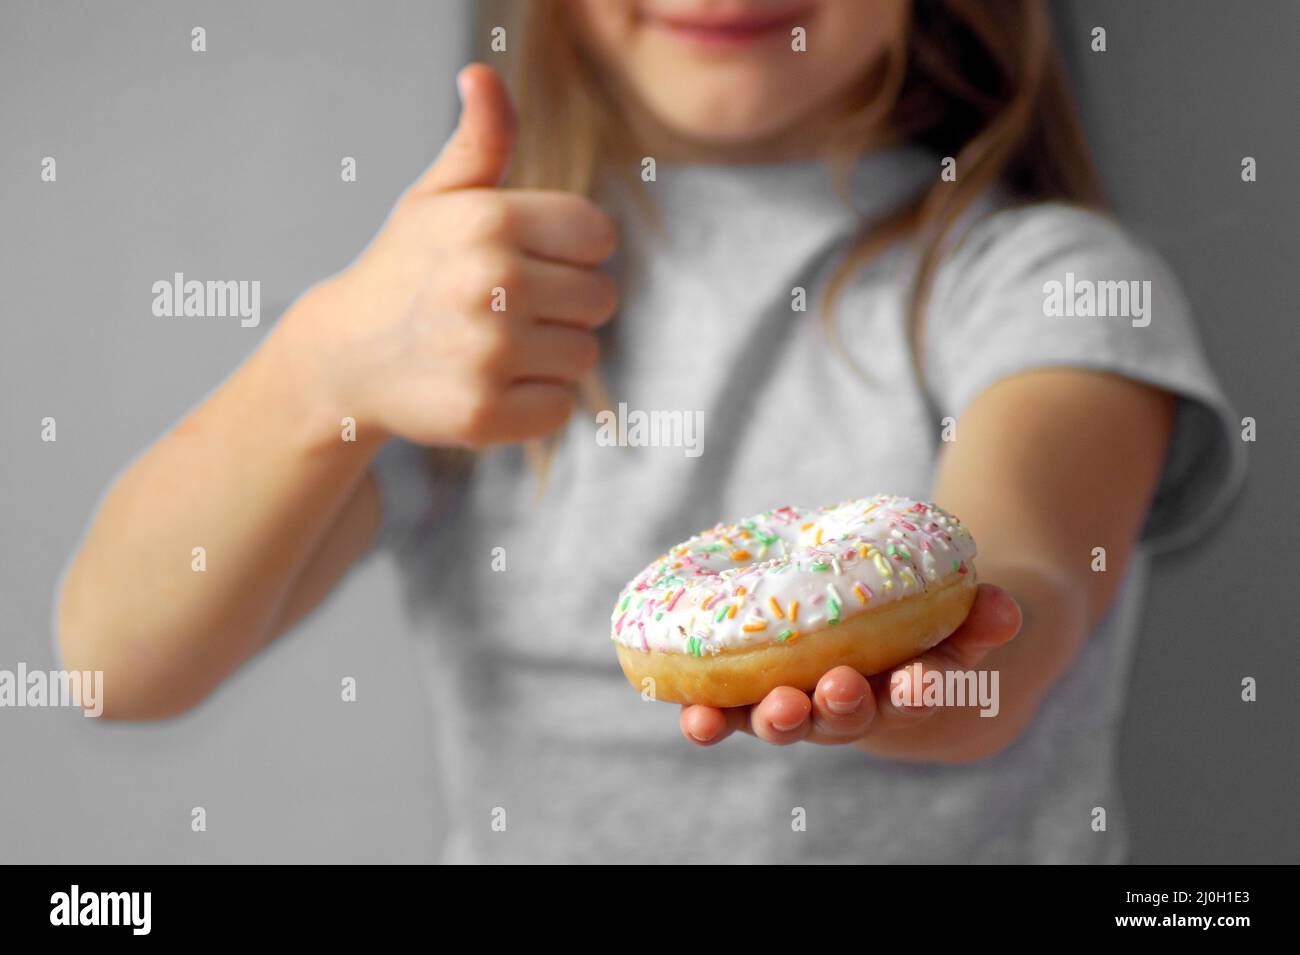 The child shows with a gesture - thumbs up - that the donut is very tasty and you need to buy it Stock Photo